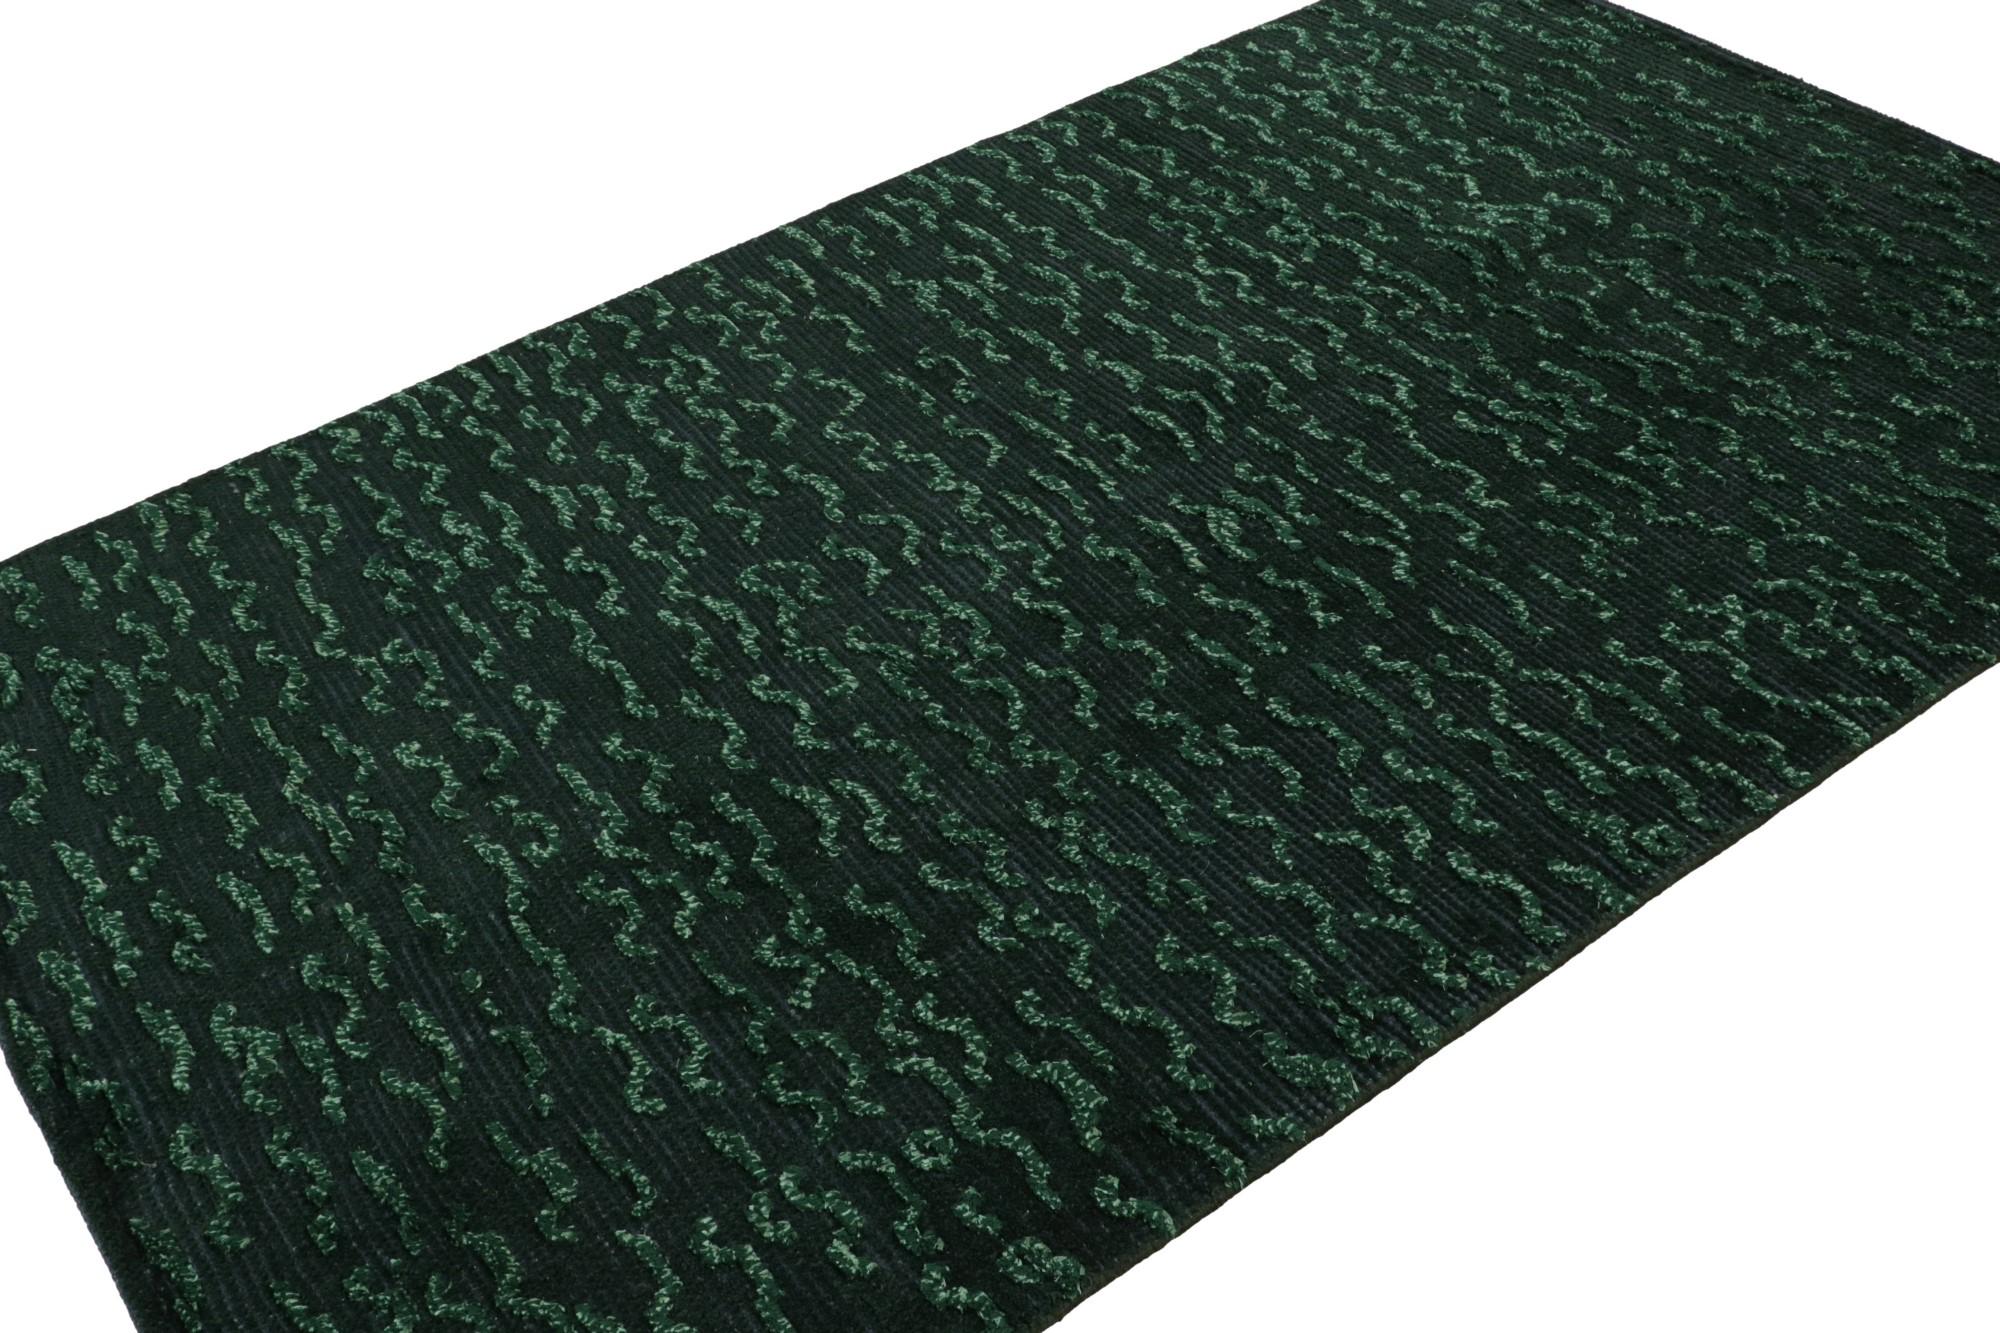 This contemporary 5x8 rug is the next bold addition to Rug & Kilim’s modern rug designs. Hand-knotted in wool & cotton.

Further on the Design: 

Making a smart take on minimalism, the immersive pattern enjoys tones of green. Keen eyes will admire a